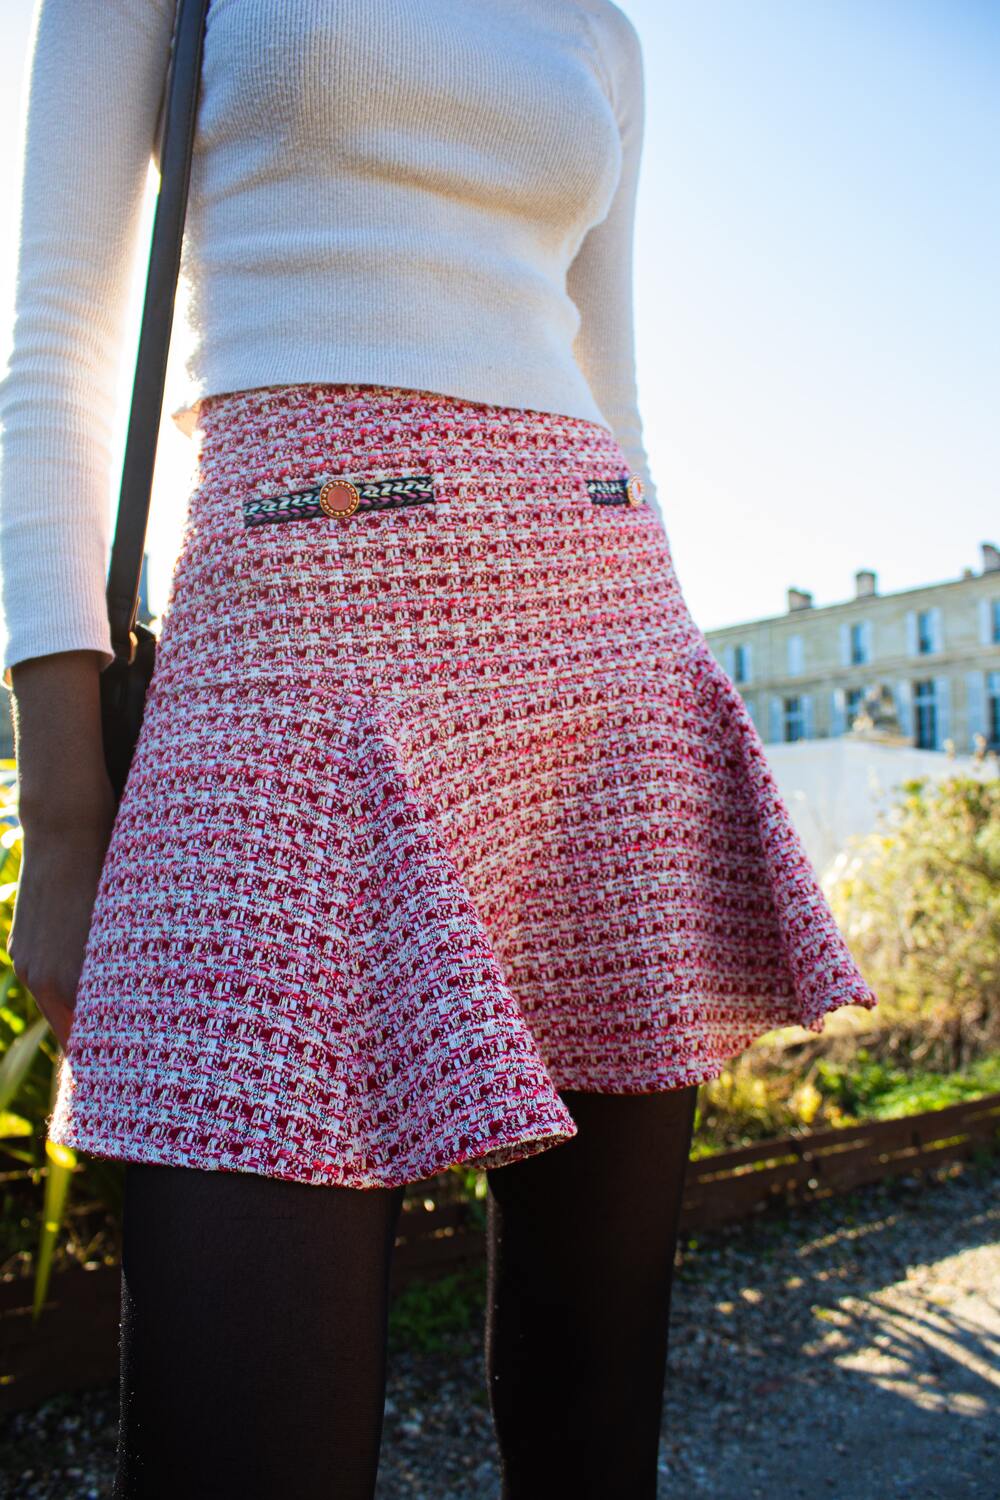 Woolen or knitted skirts